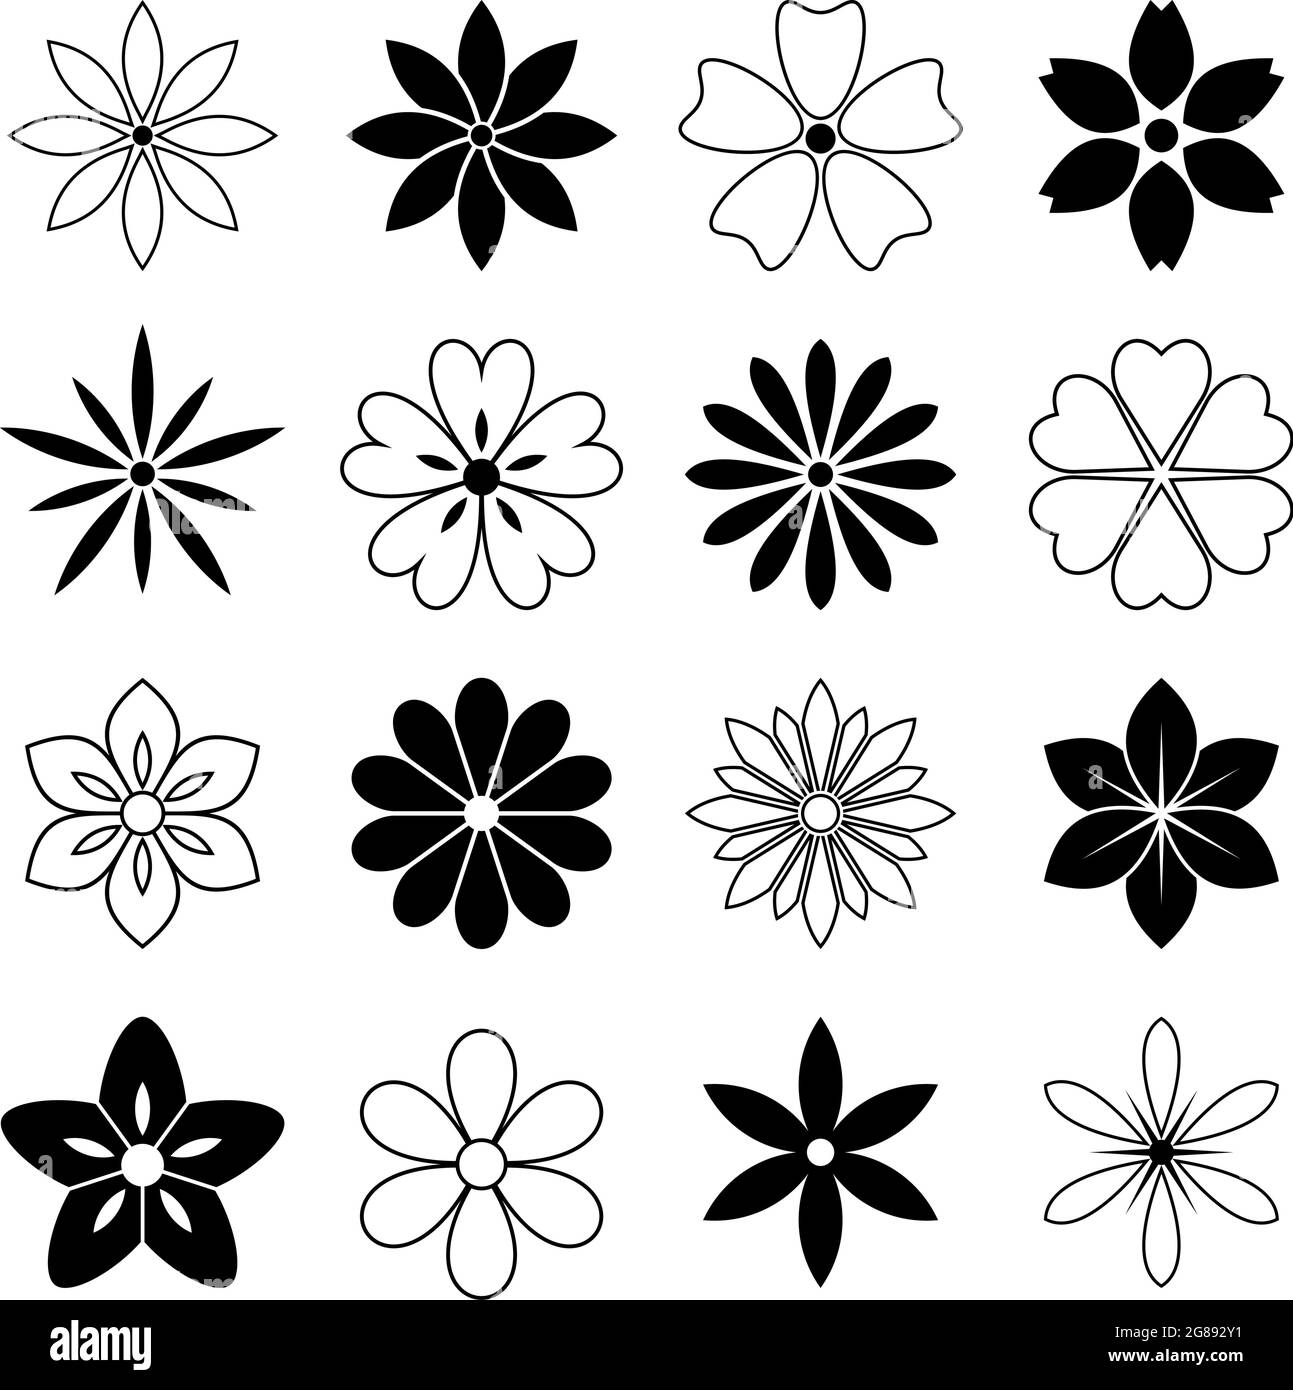 Simple flower vector set on white isolated background. Each flower in one black united shape. Color changable. Stock Vector